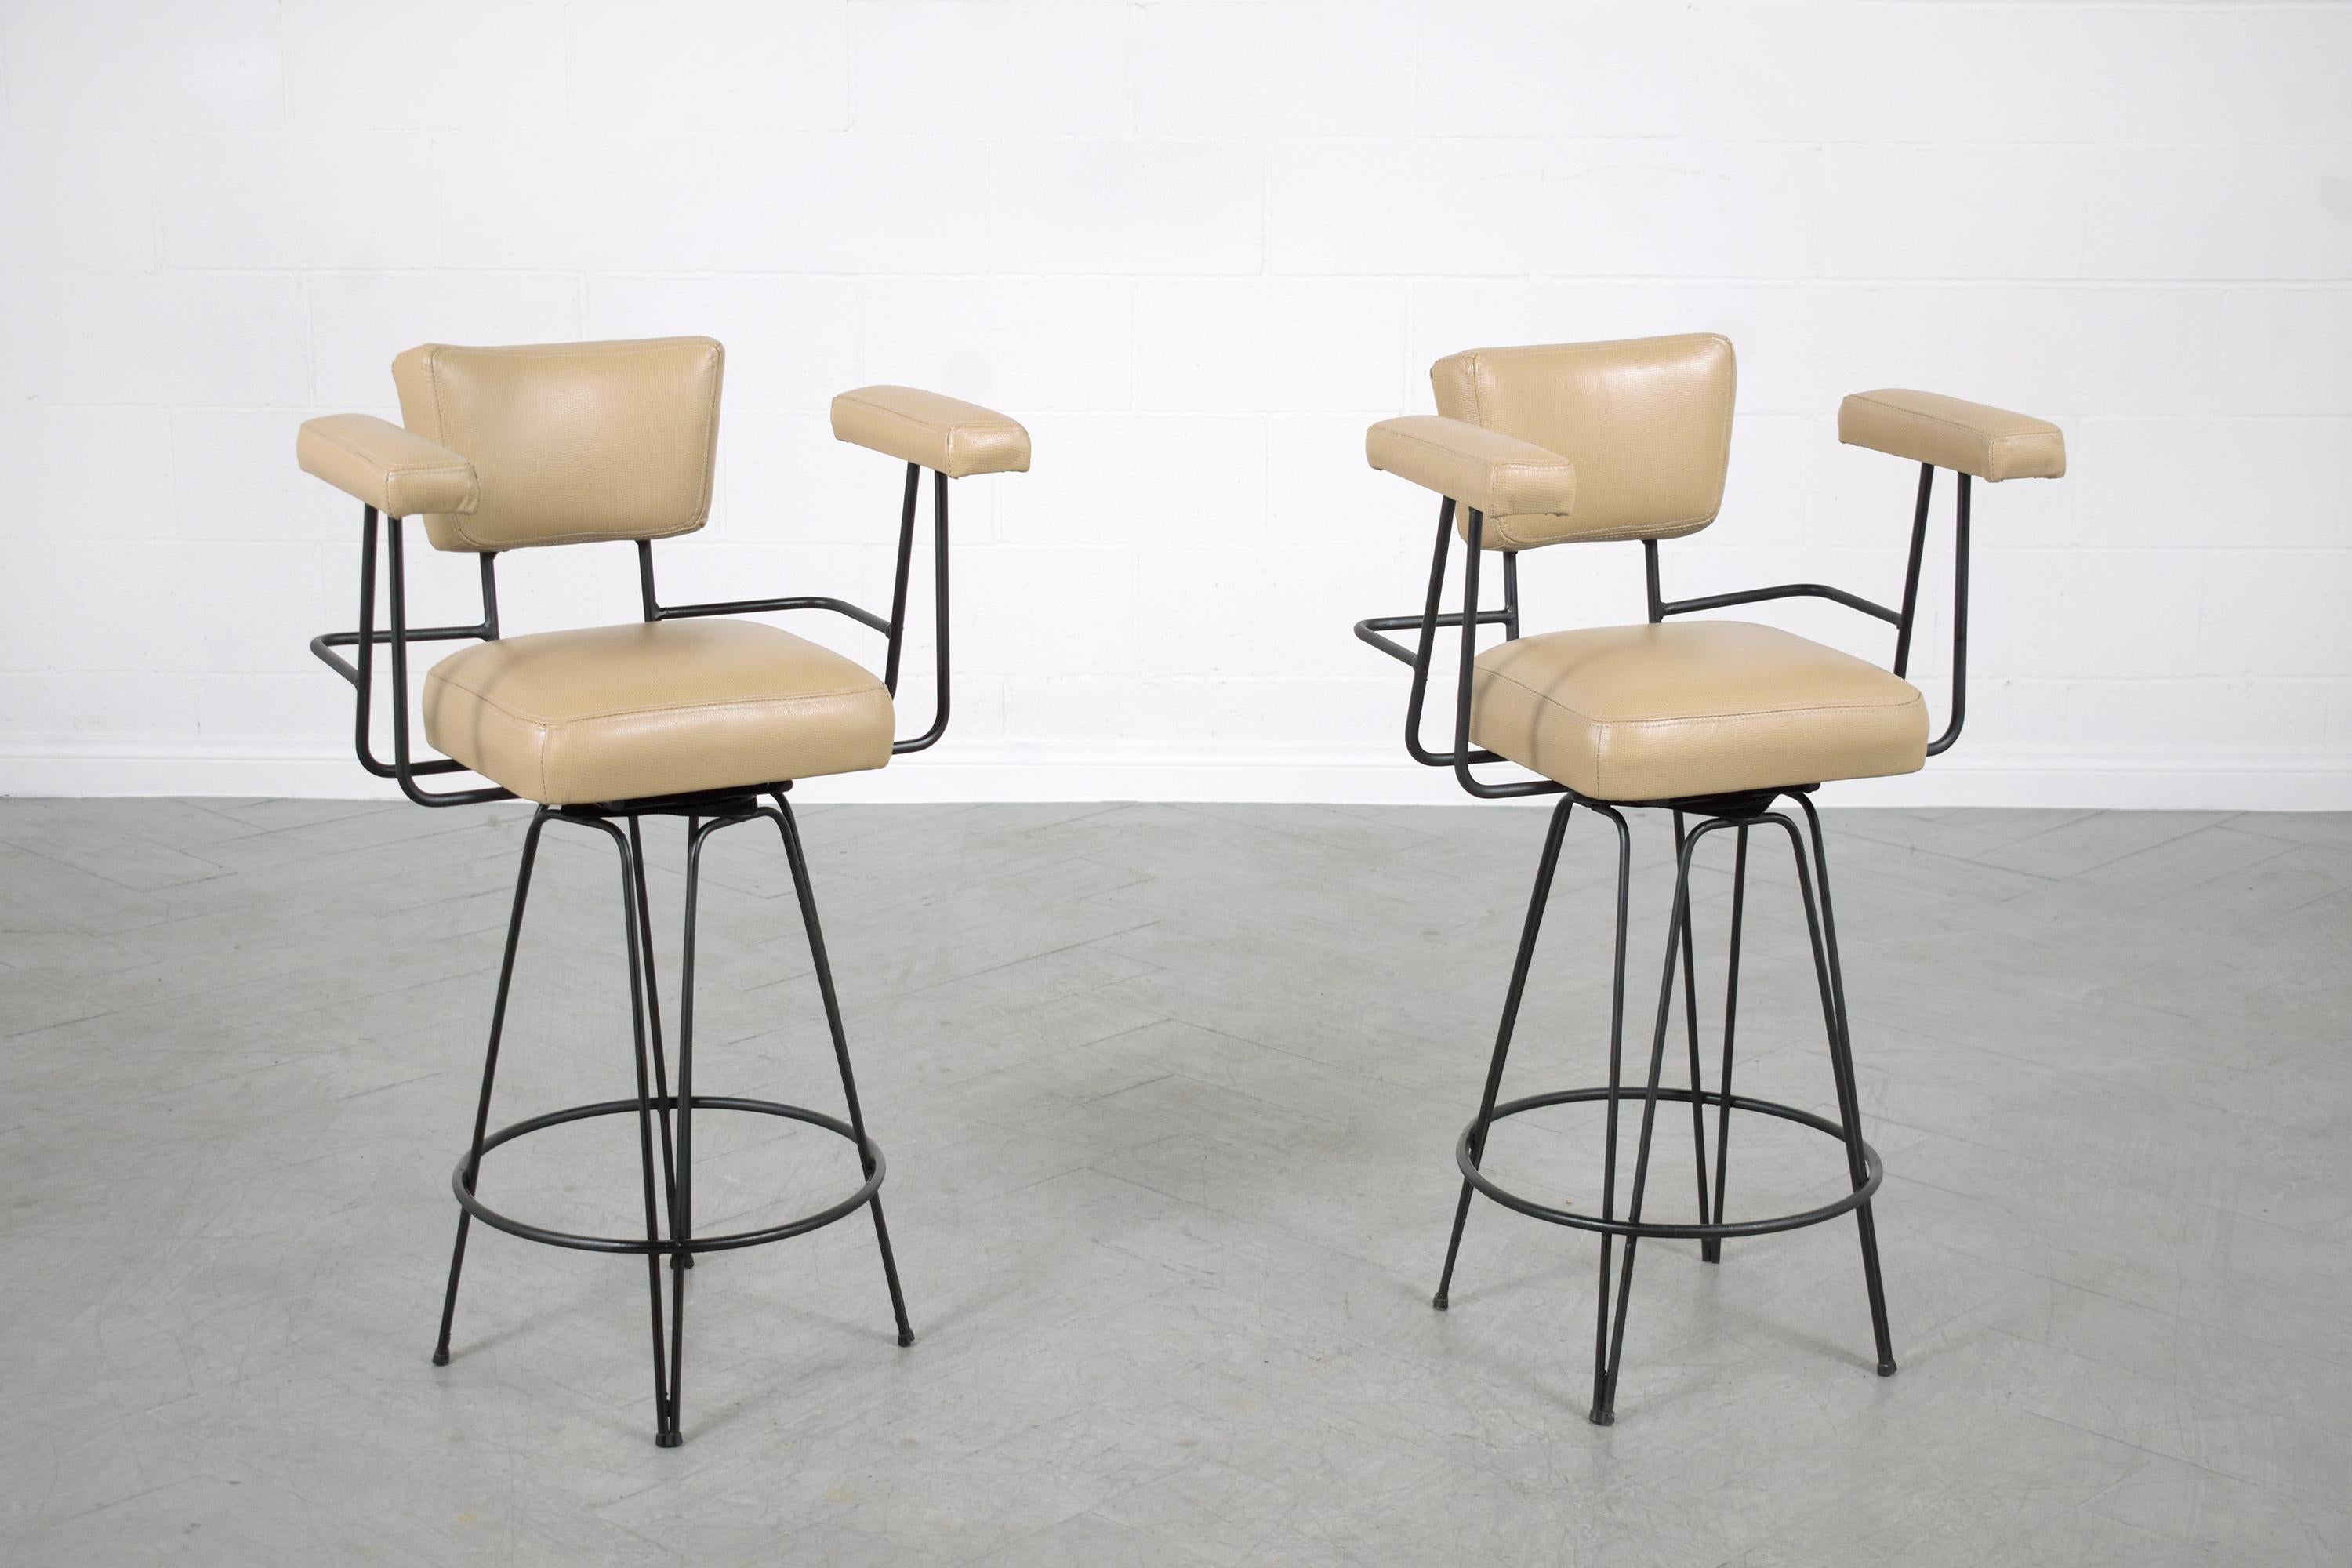 Late 20th Century Restored 1970s Mid-Century Modern Swivel Barstools in Beige Leather For Sale